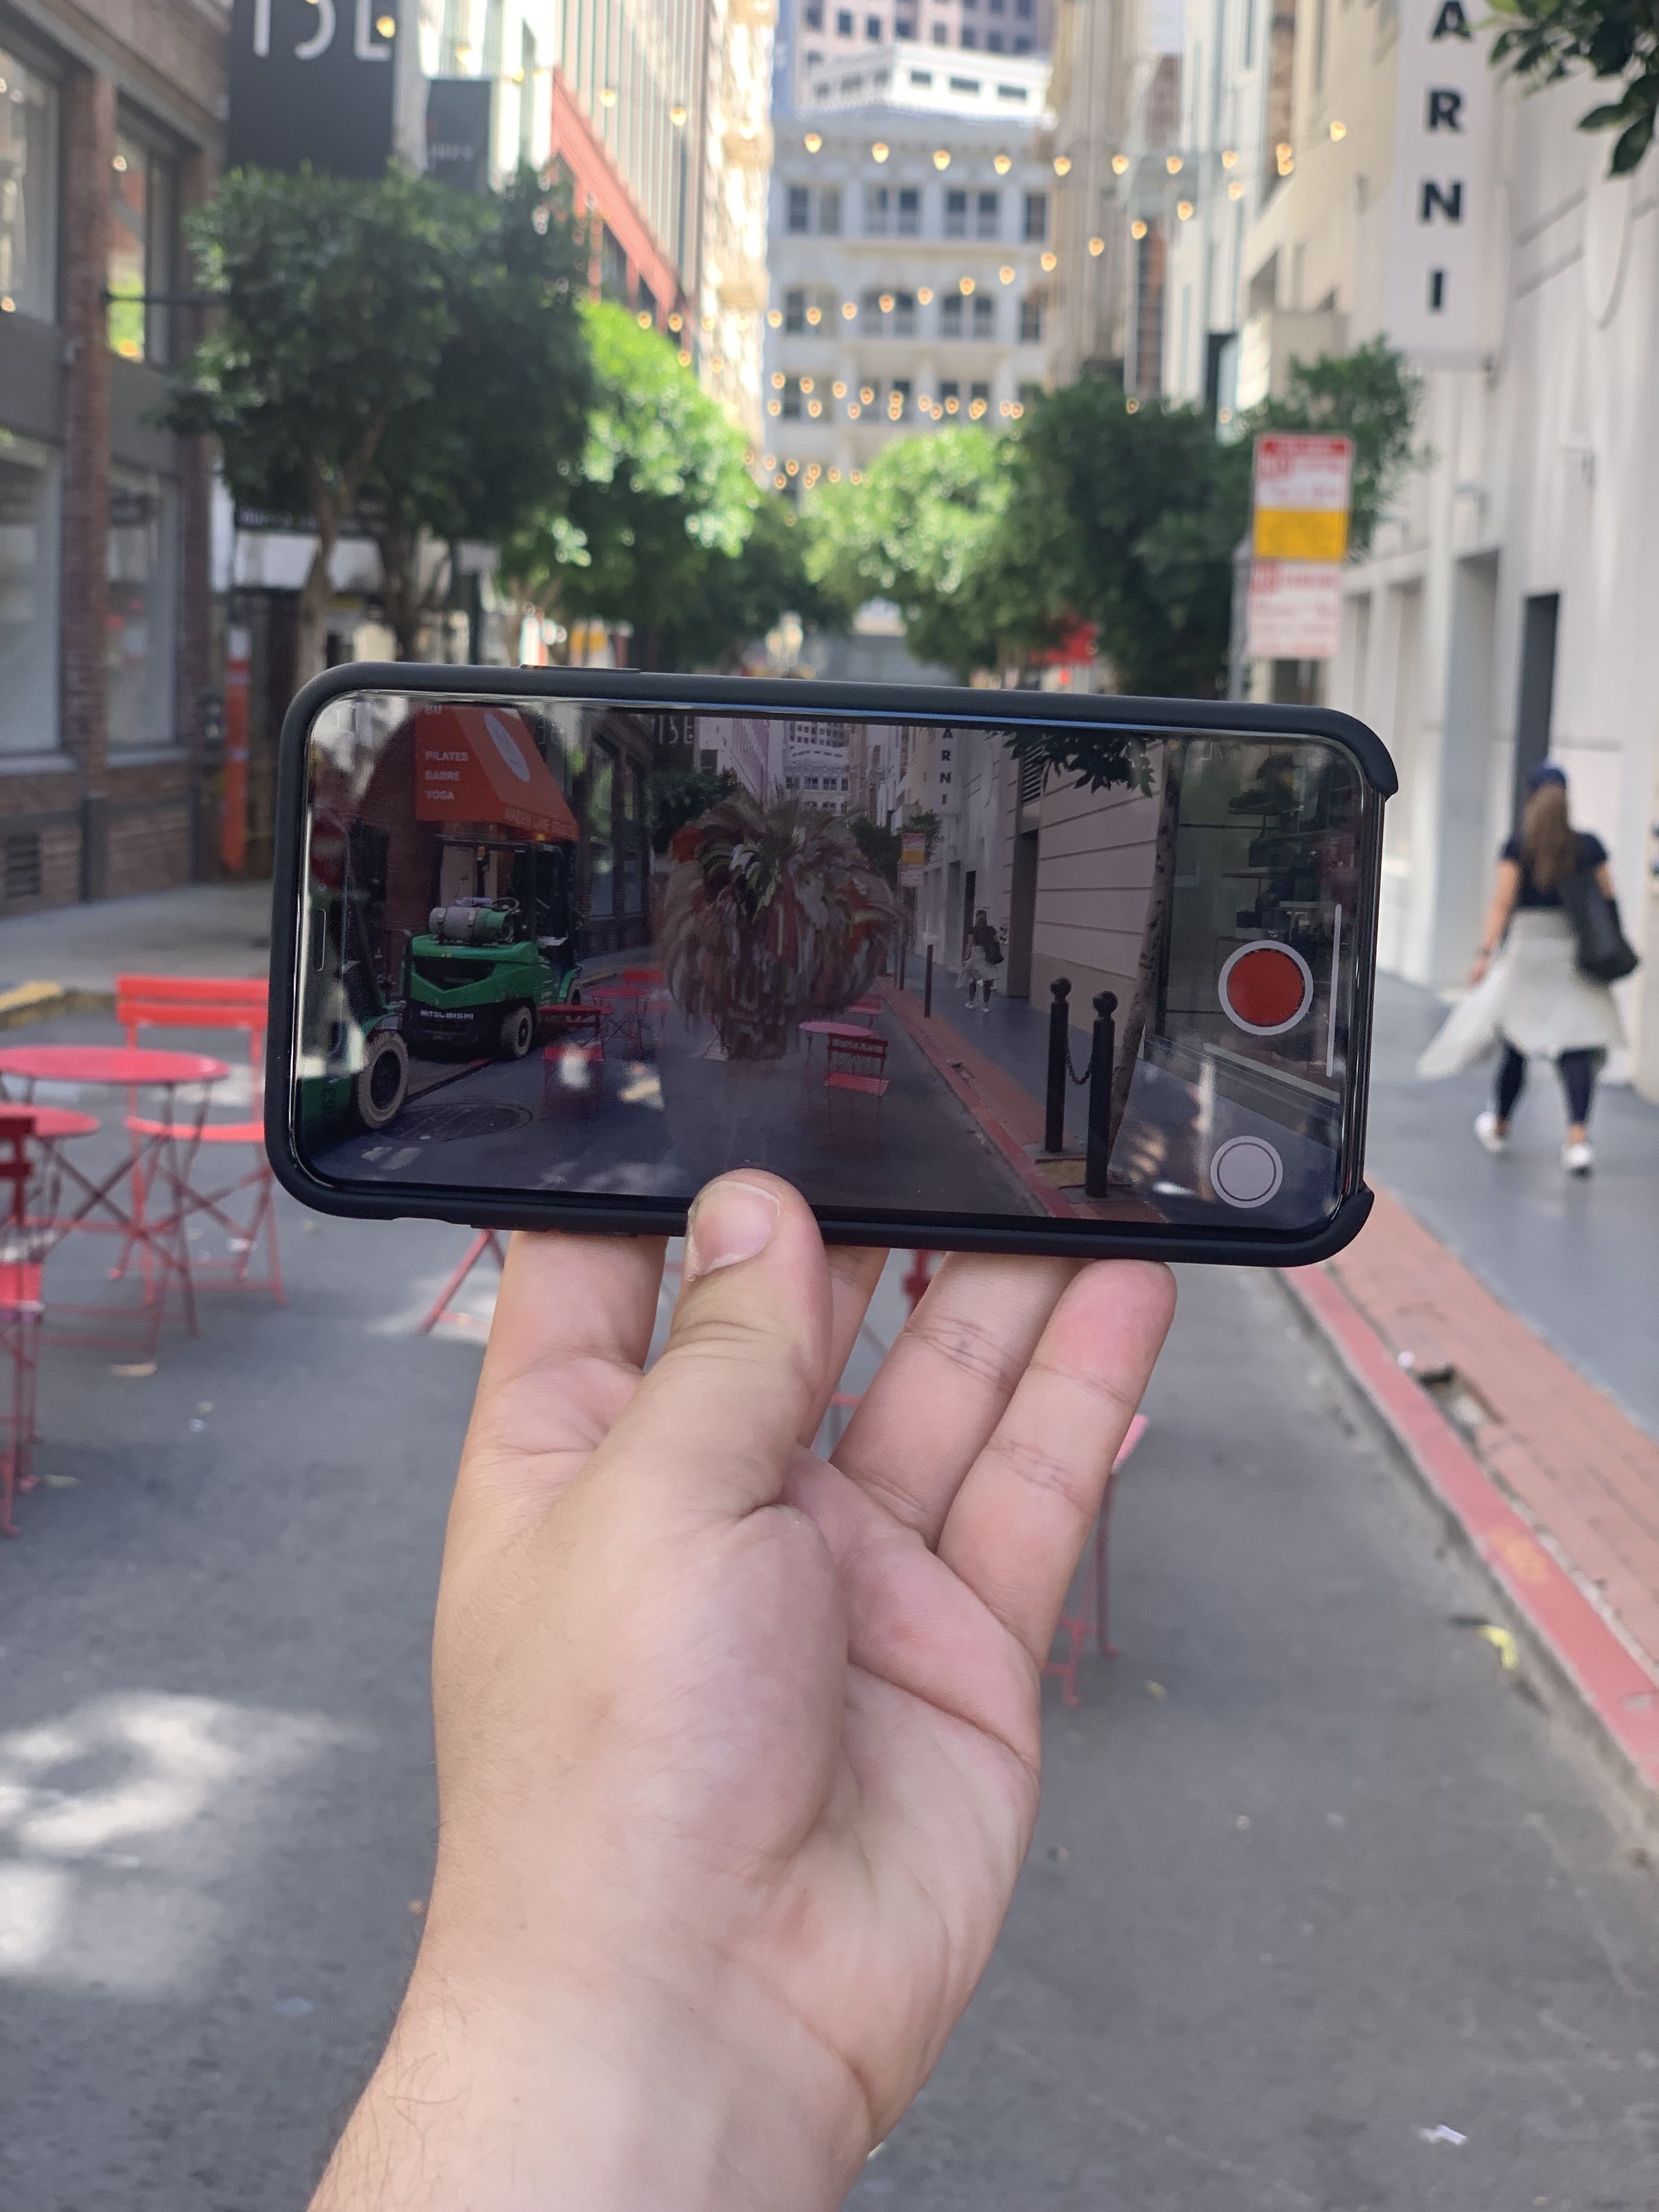 Apple Stores host augmented reality iPhone art walks